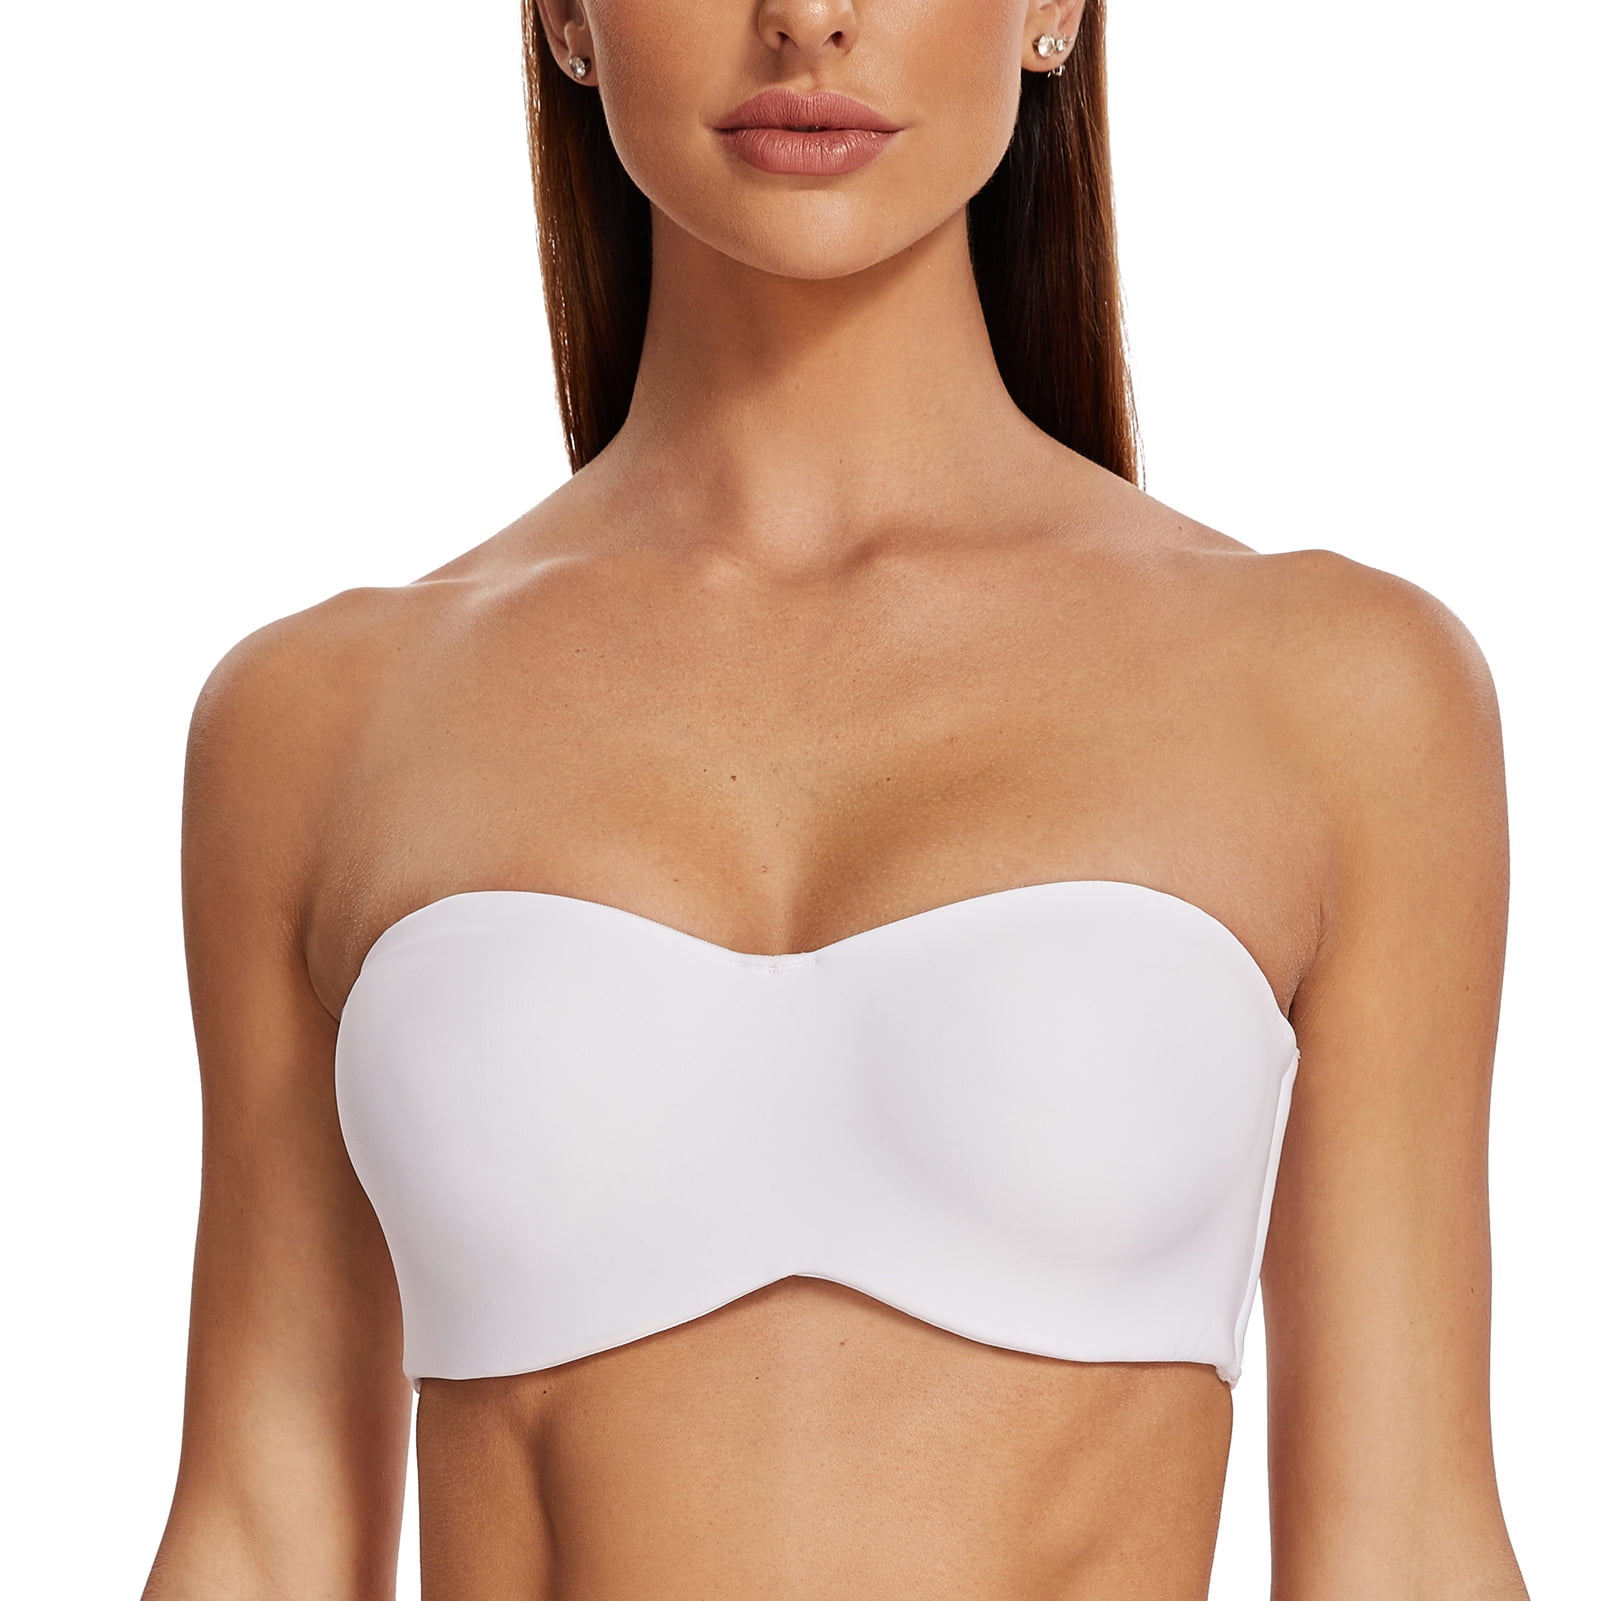 MELENECA Strapless Bra Minimizer with Underwire for Women Pale Nude 32D